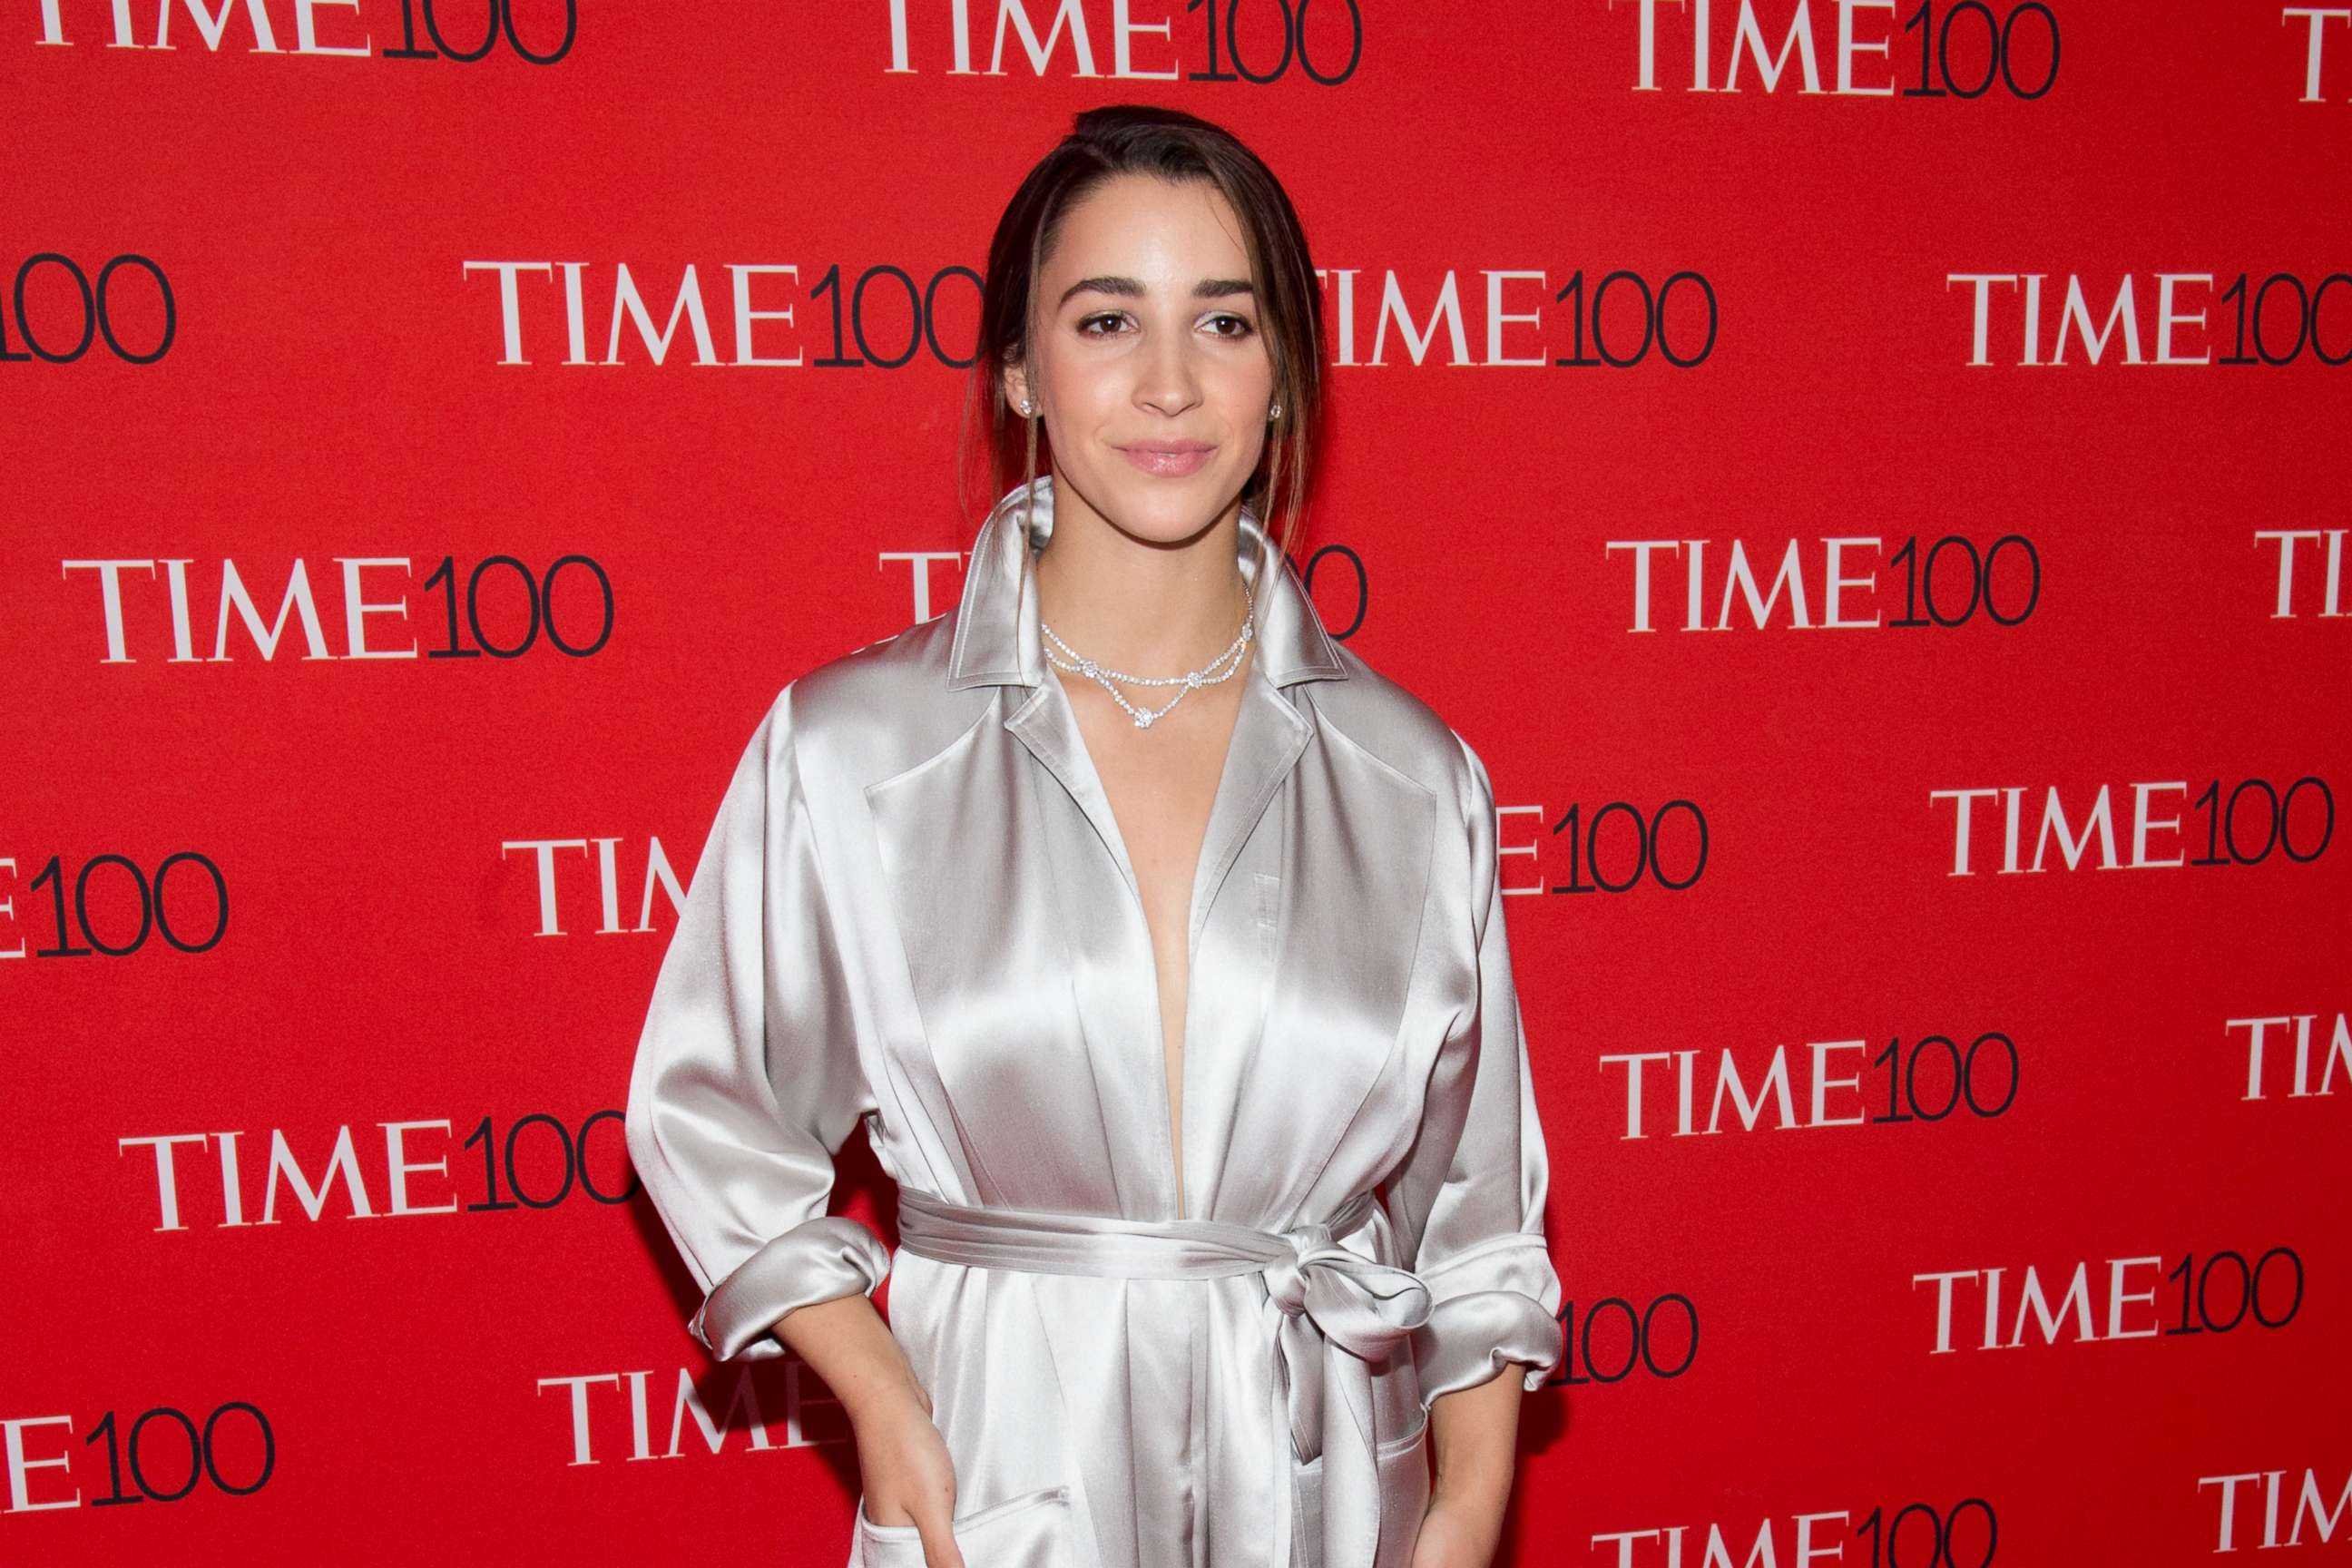 PHOTO: Aly Raisman attends the 2018 Time 100 Gala at Frederick P. Rose Hall, Jazz at Lincoln Center on April 24, 2018 in New York City.